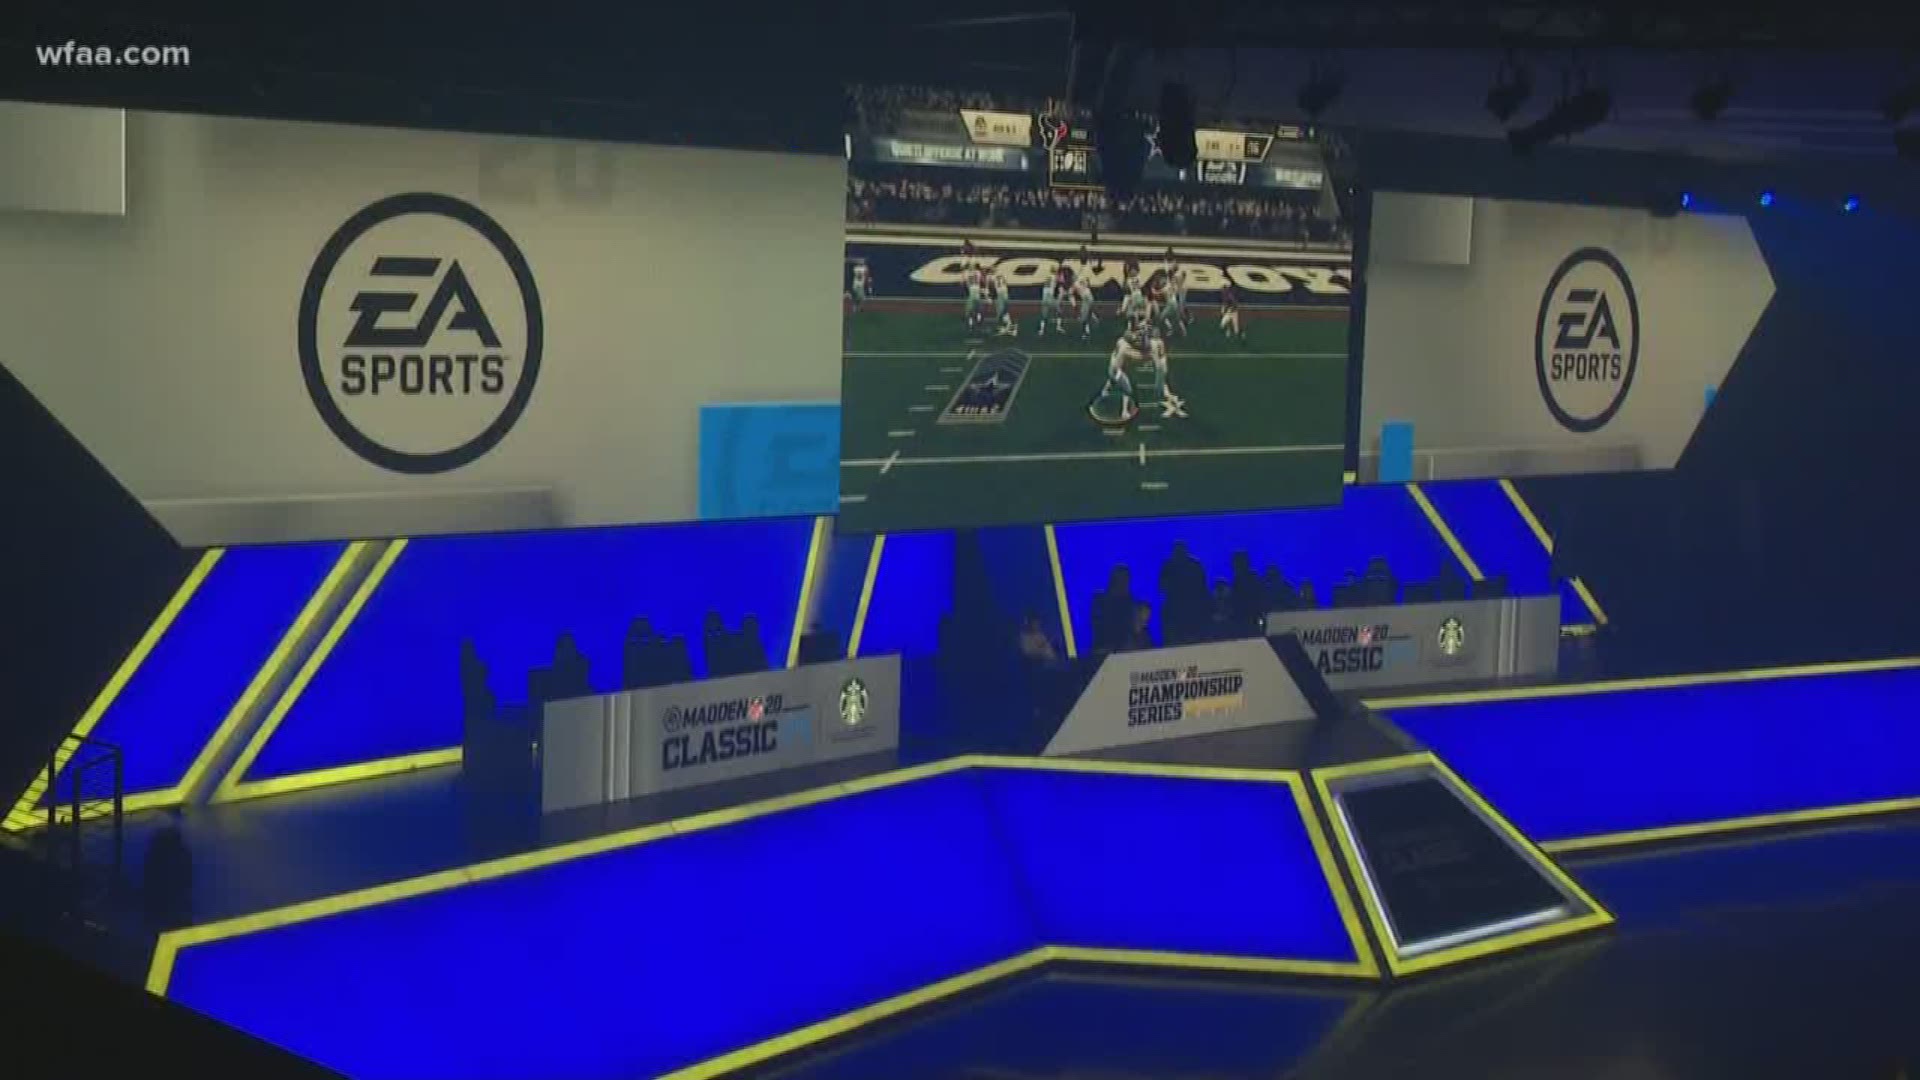 More than 500 Madden players flew in from all over the country to get their share of $190,000 in prizes at the EA Madden Classic. The Esports Stadium in Arlington's entertainment district is hosting the 3-day tournament for the first time.